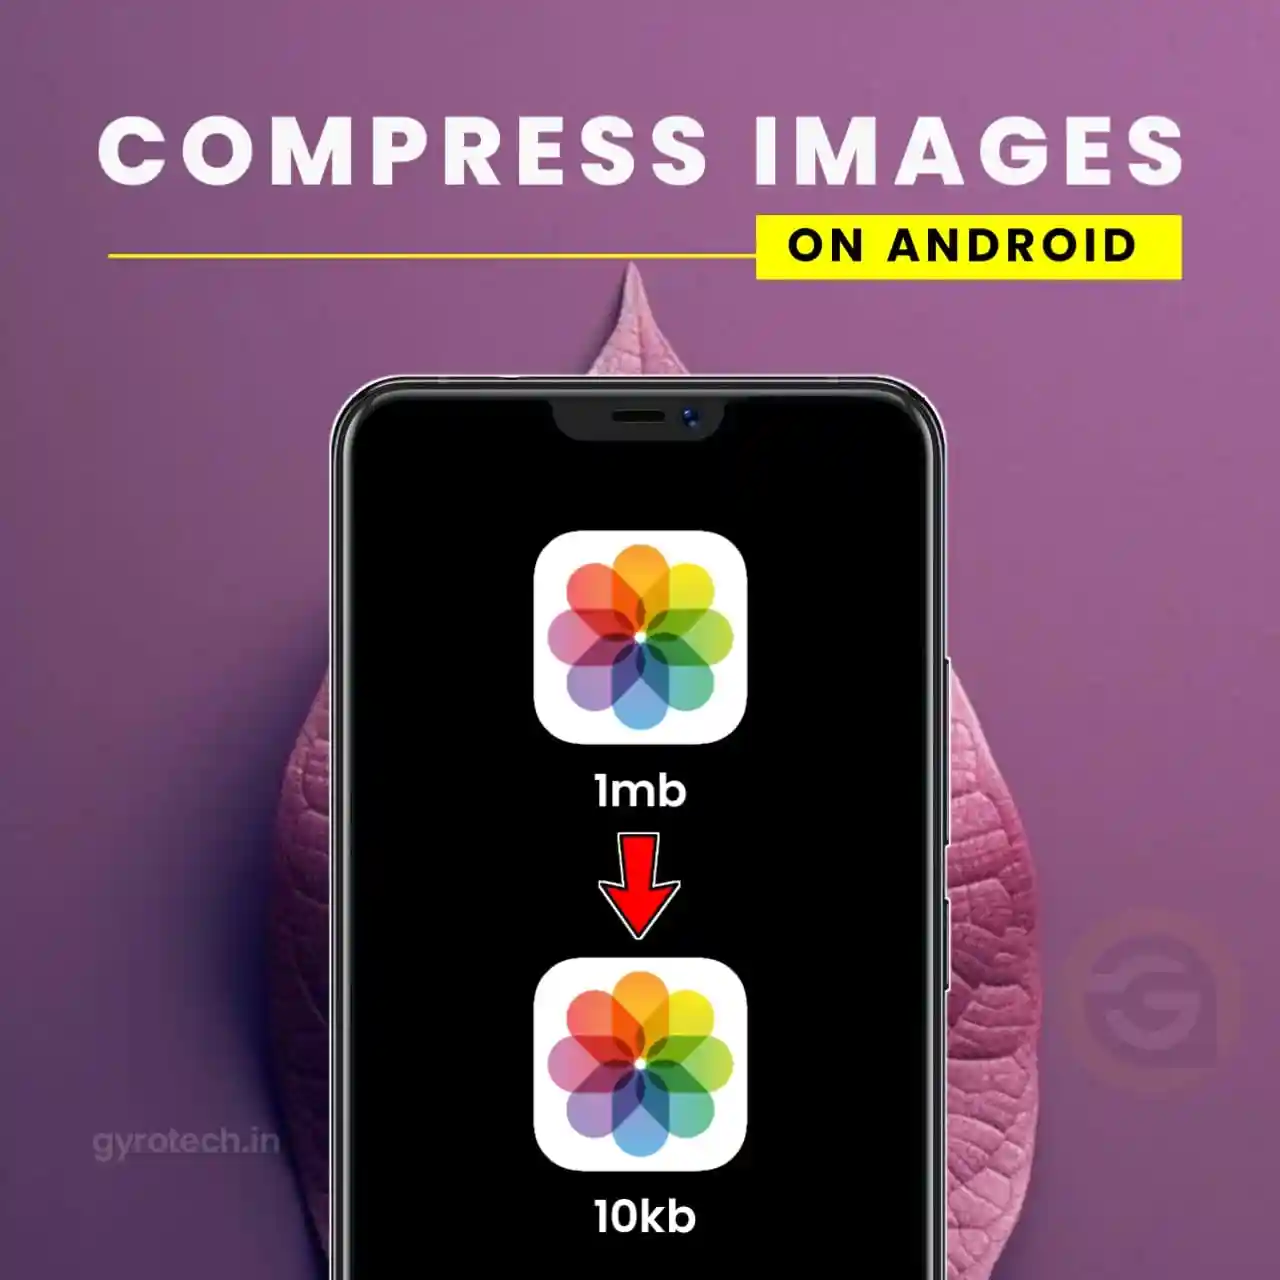 How To Compress Images In Android Phone Without Losing Quality